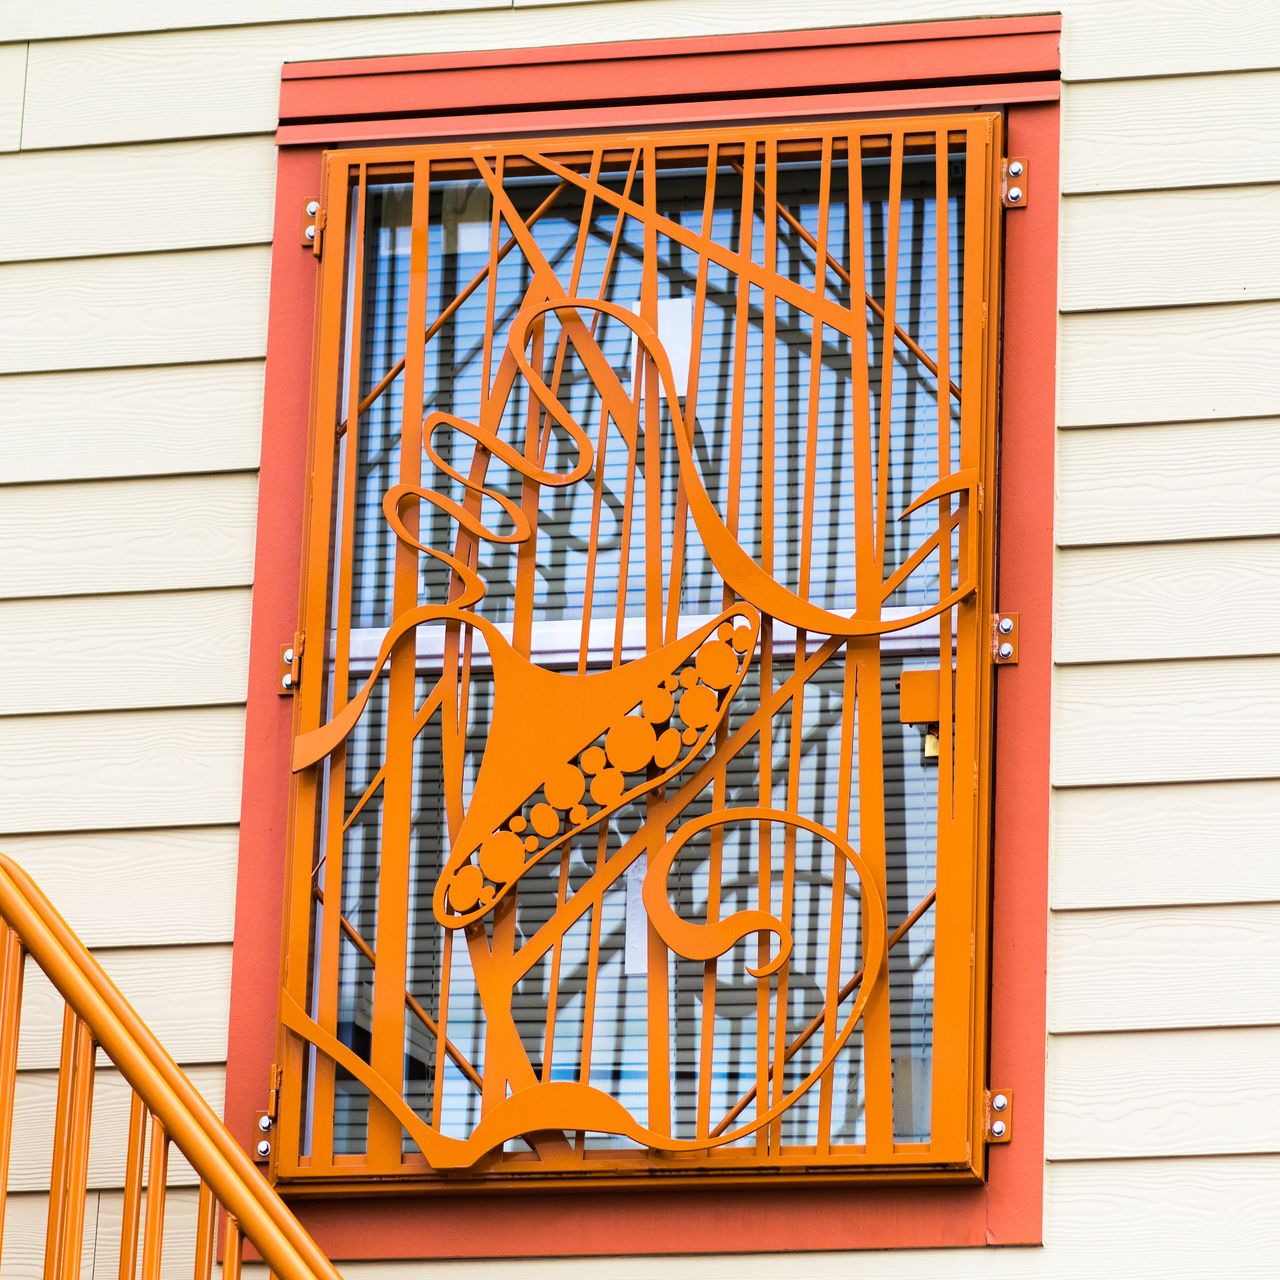 These emergency shelter security window grilles were designed and fabricated by architect Jennifer Weddermann for YWCA Pierce County in Tacoma, Washington.